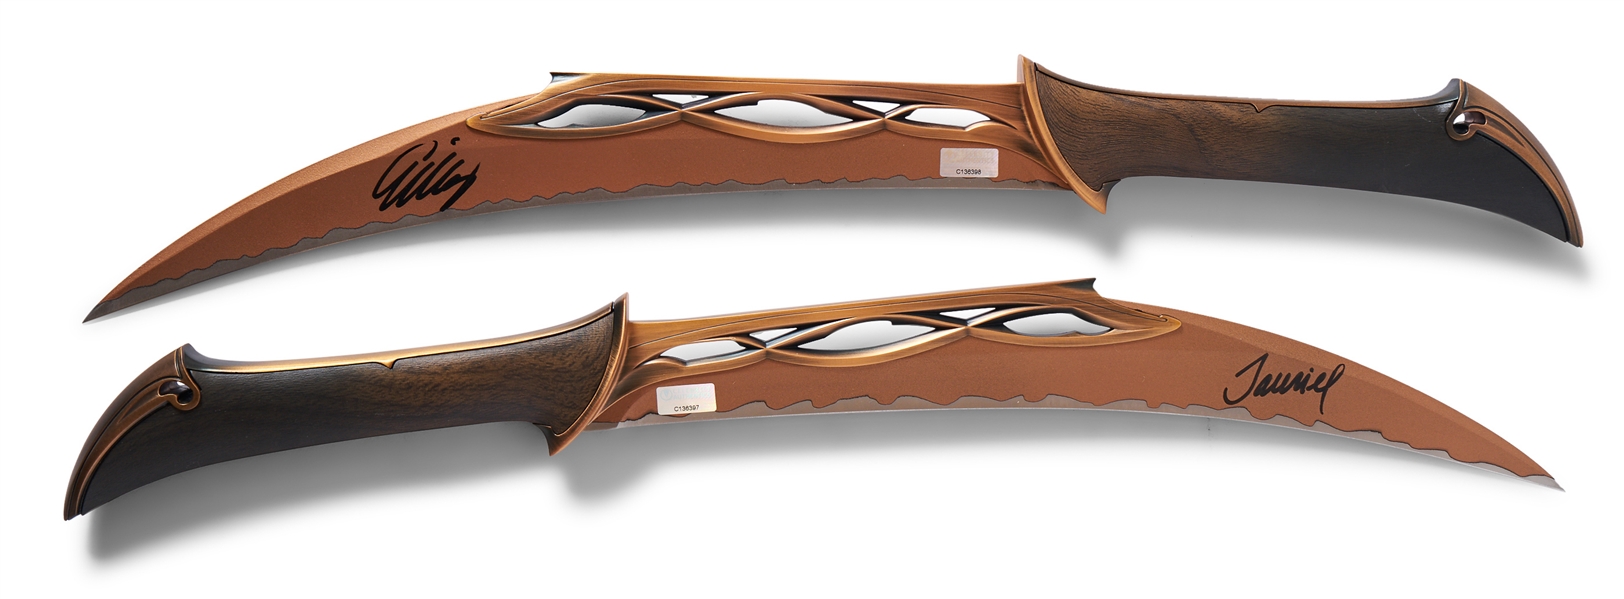 Evangeline Lilly Signed Set of Daggers, Tauriel's Weapons in ''The Hobbit'' Franchise